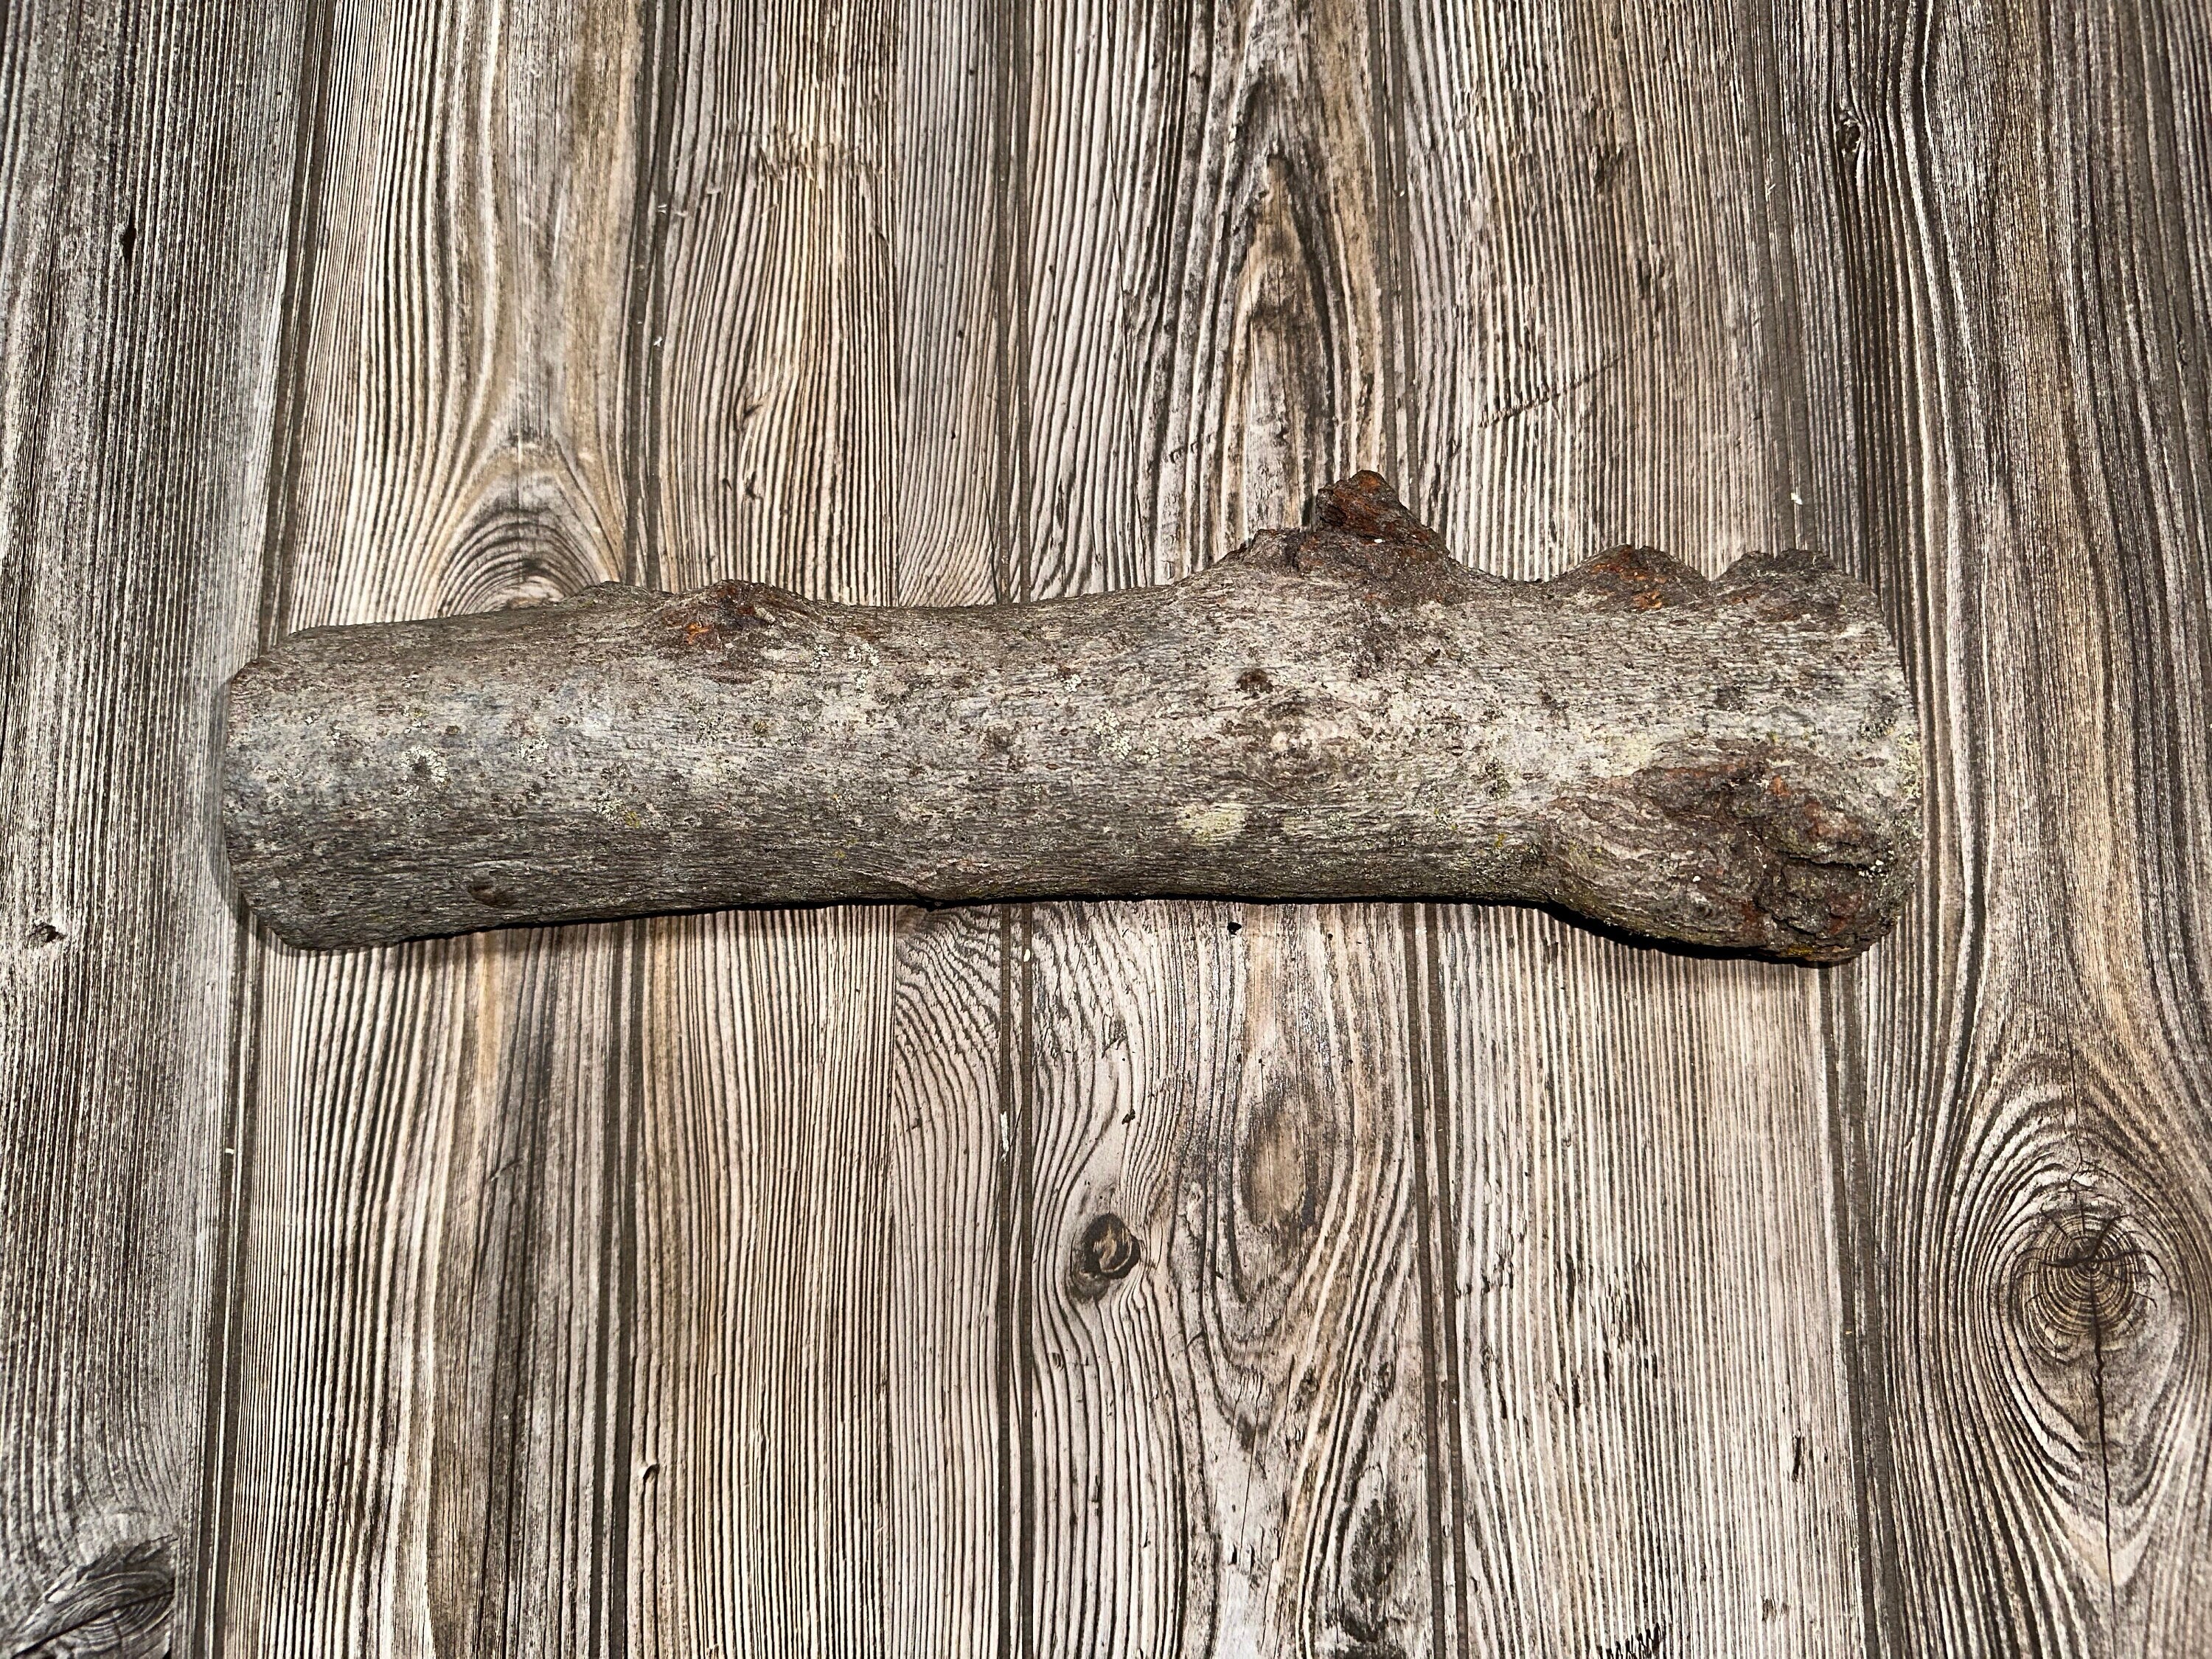 Aspen Burl Log, Approximately 14.5 Inches Long by 3 Inches Diameter